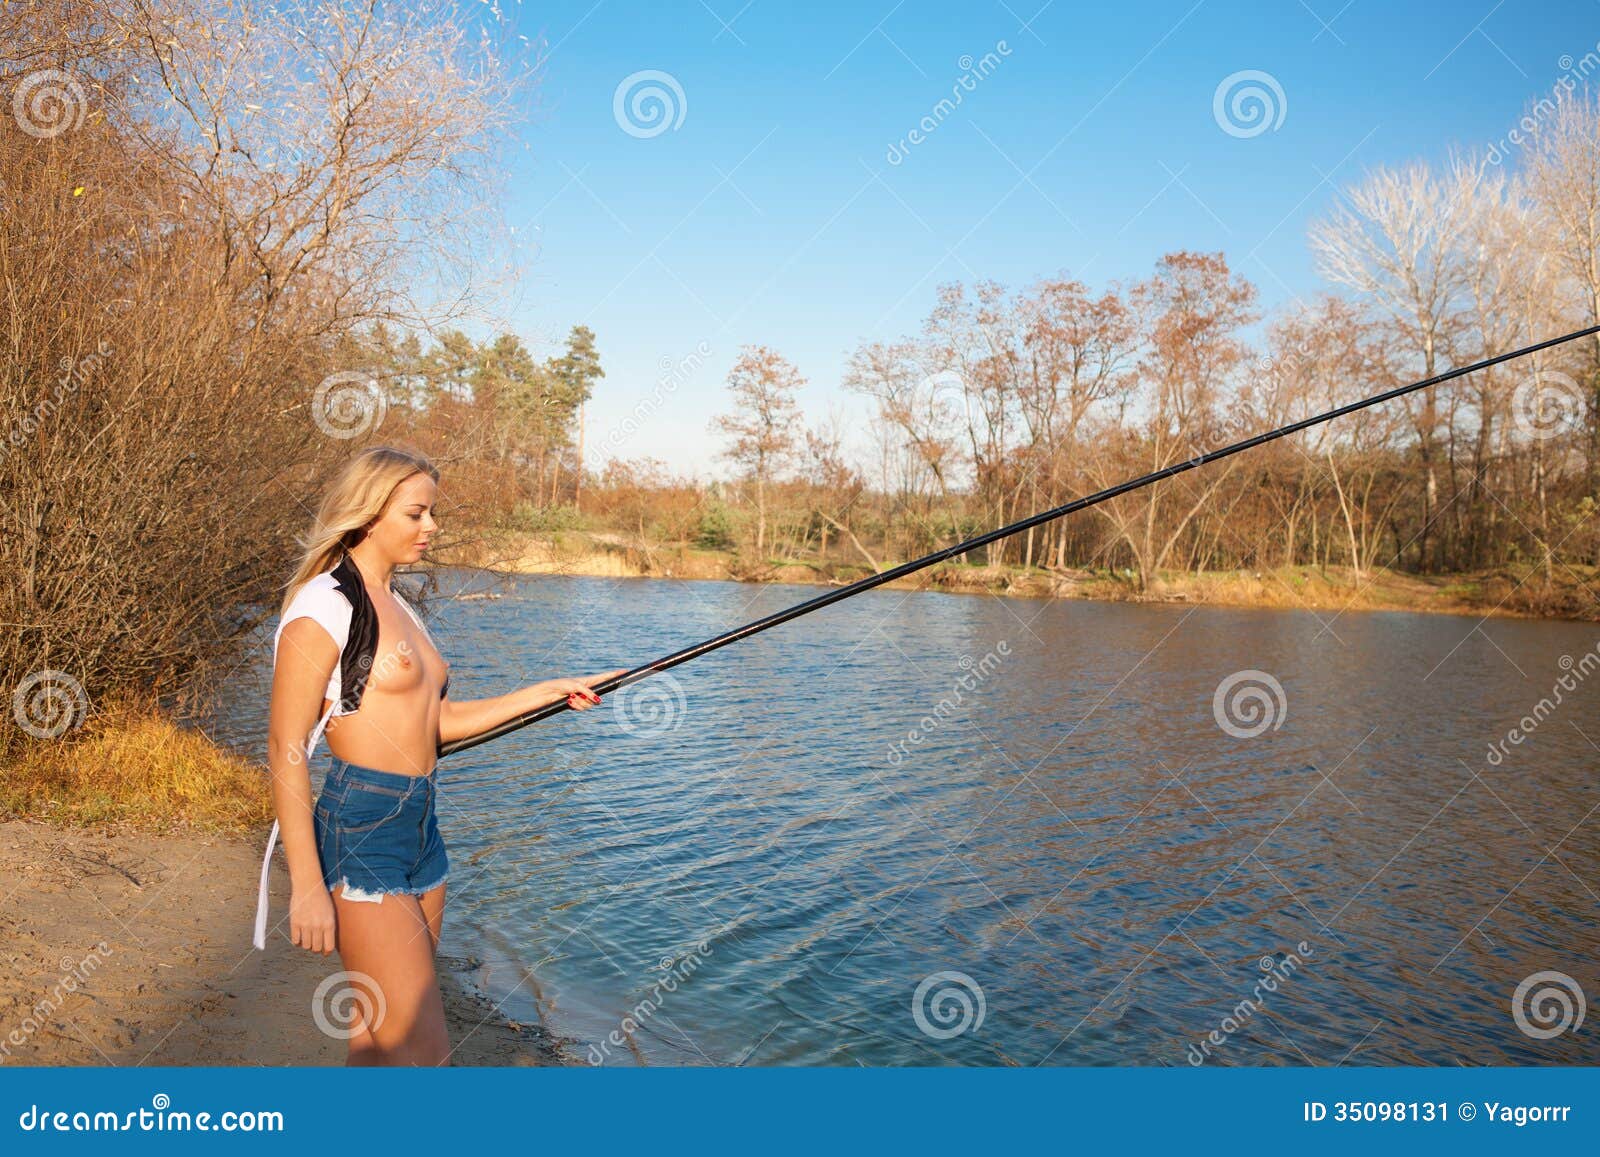 Topless Girl Fishing At The River Stock Image Image 35098131